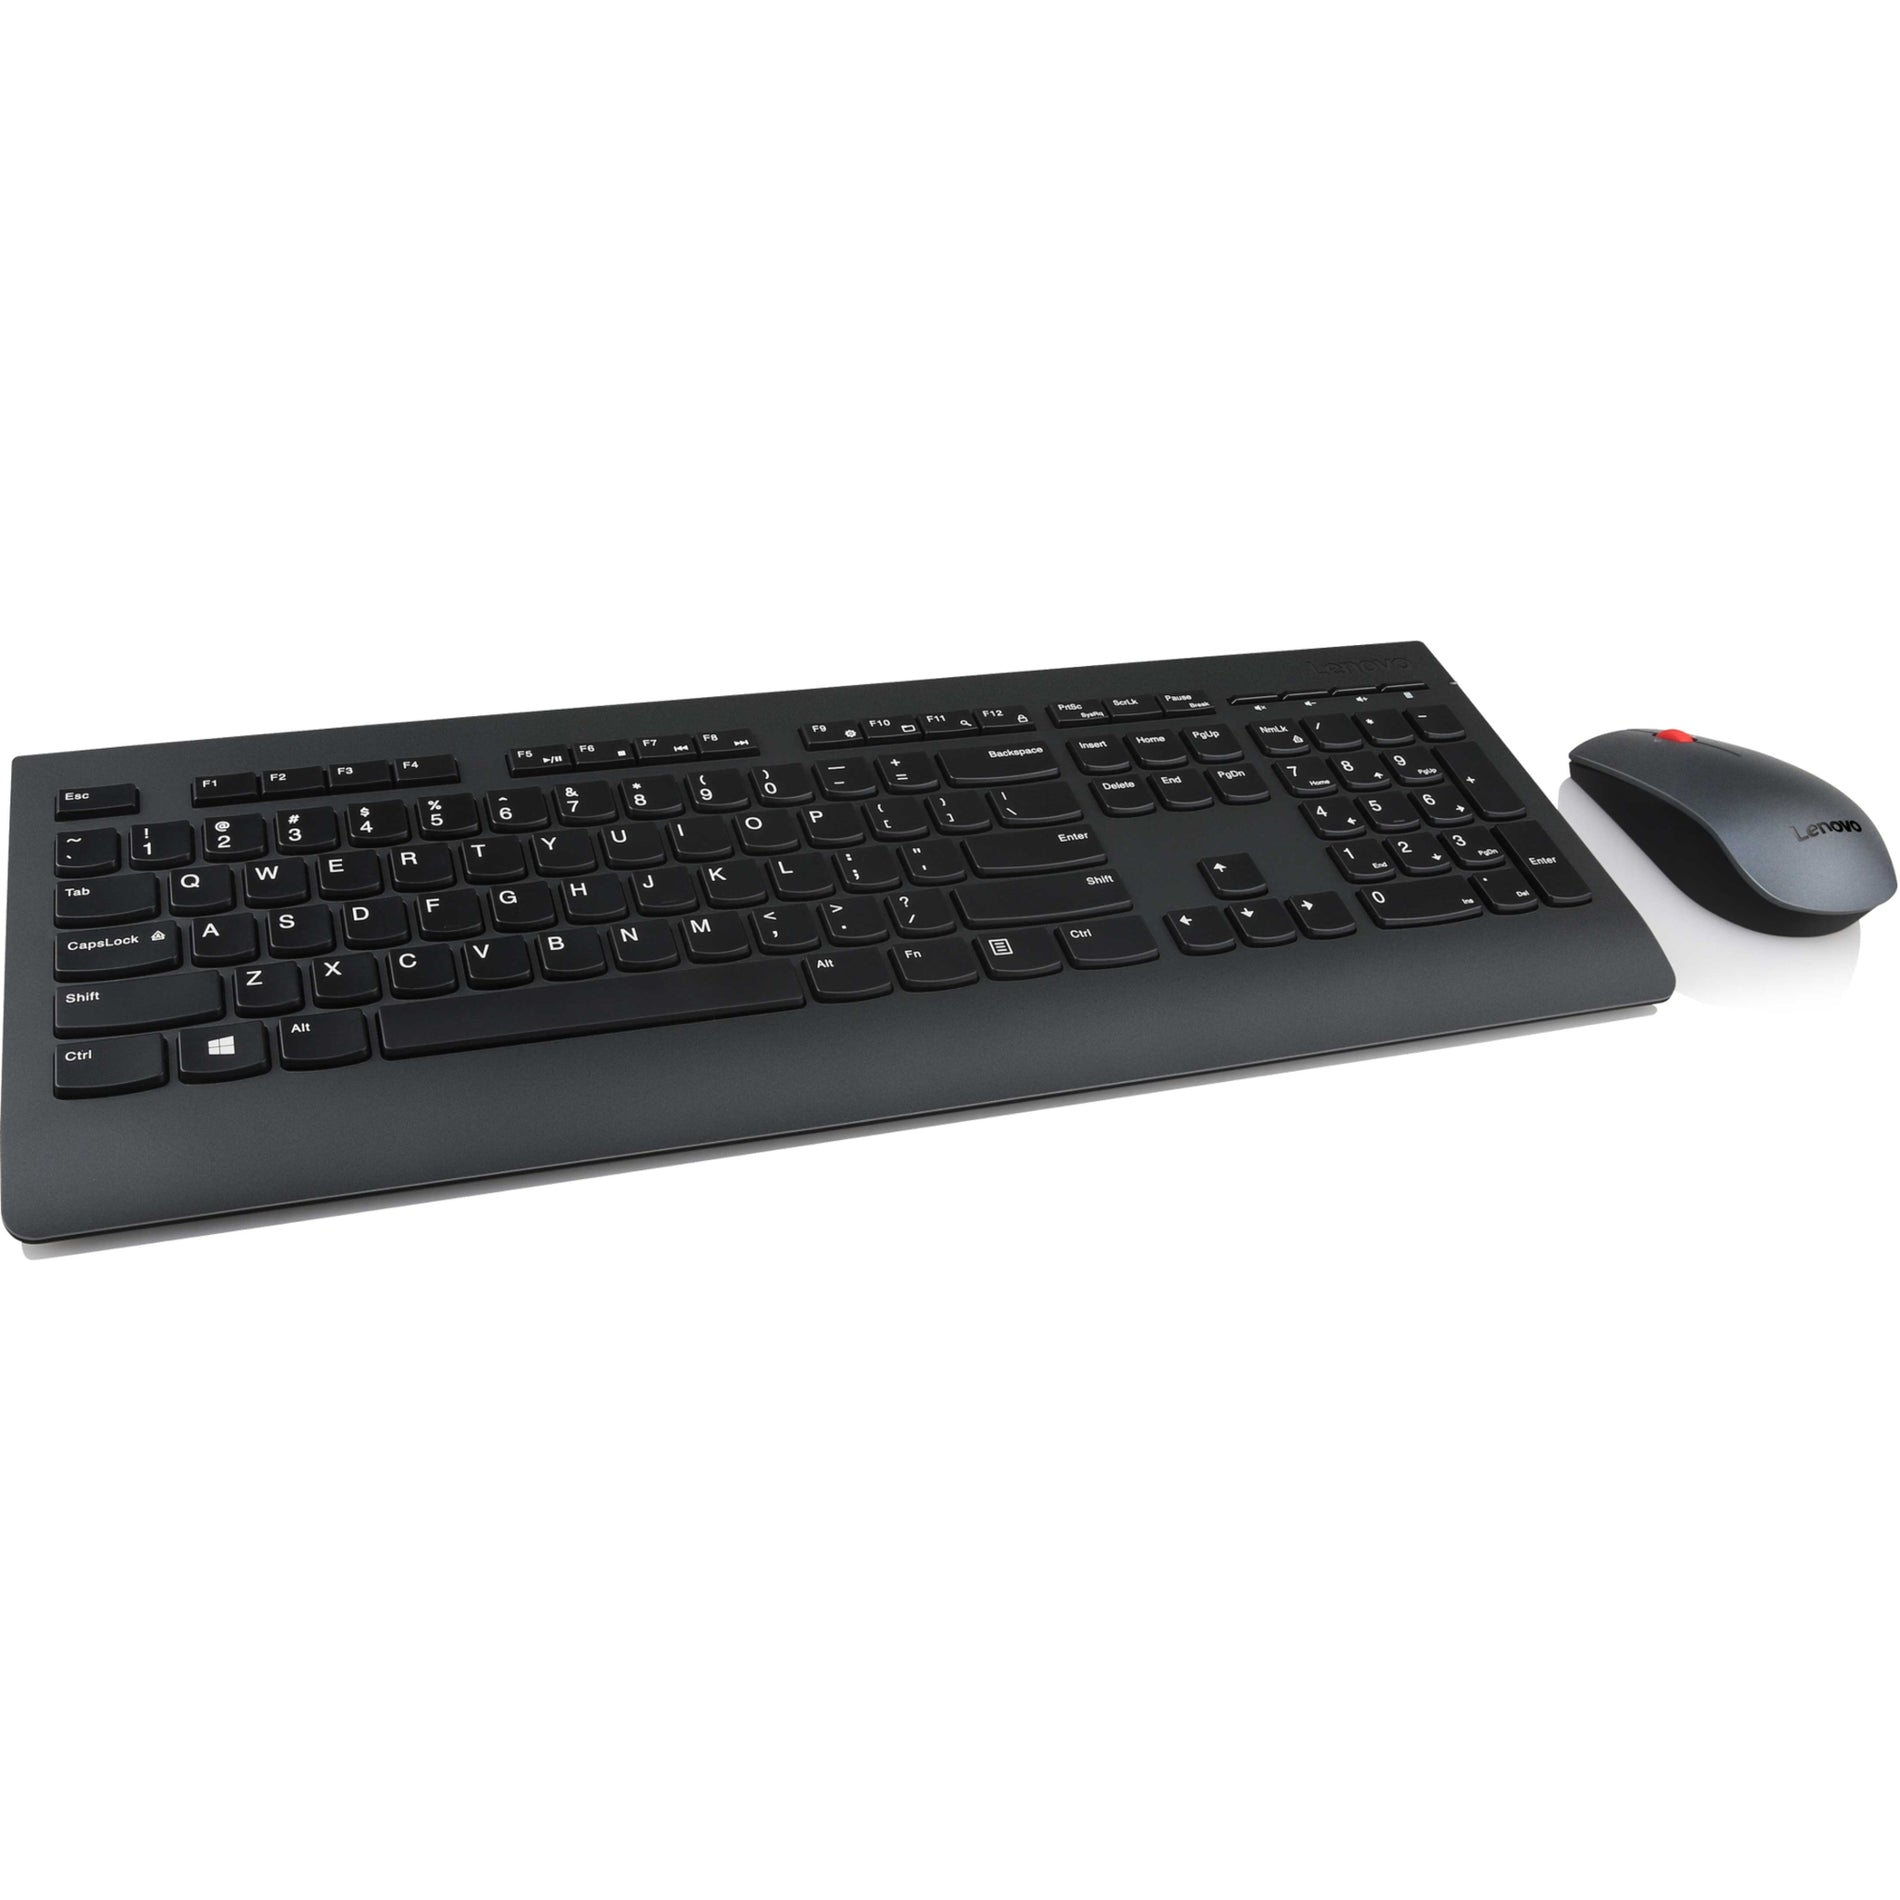 Lenovo 4X30H56831 Professional Wireless Keyboard and Mouse Combo - LA Spanish (w/o Battery), 2 Year Limited Warranty, QWERTY Layout, Media Player Hot Keys